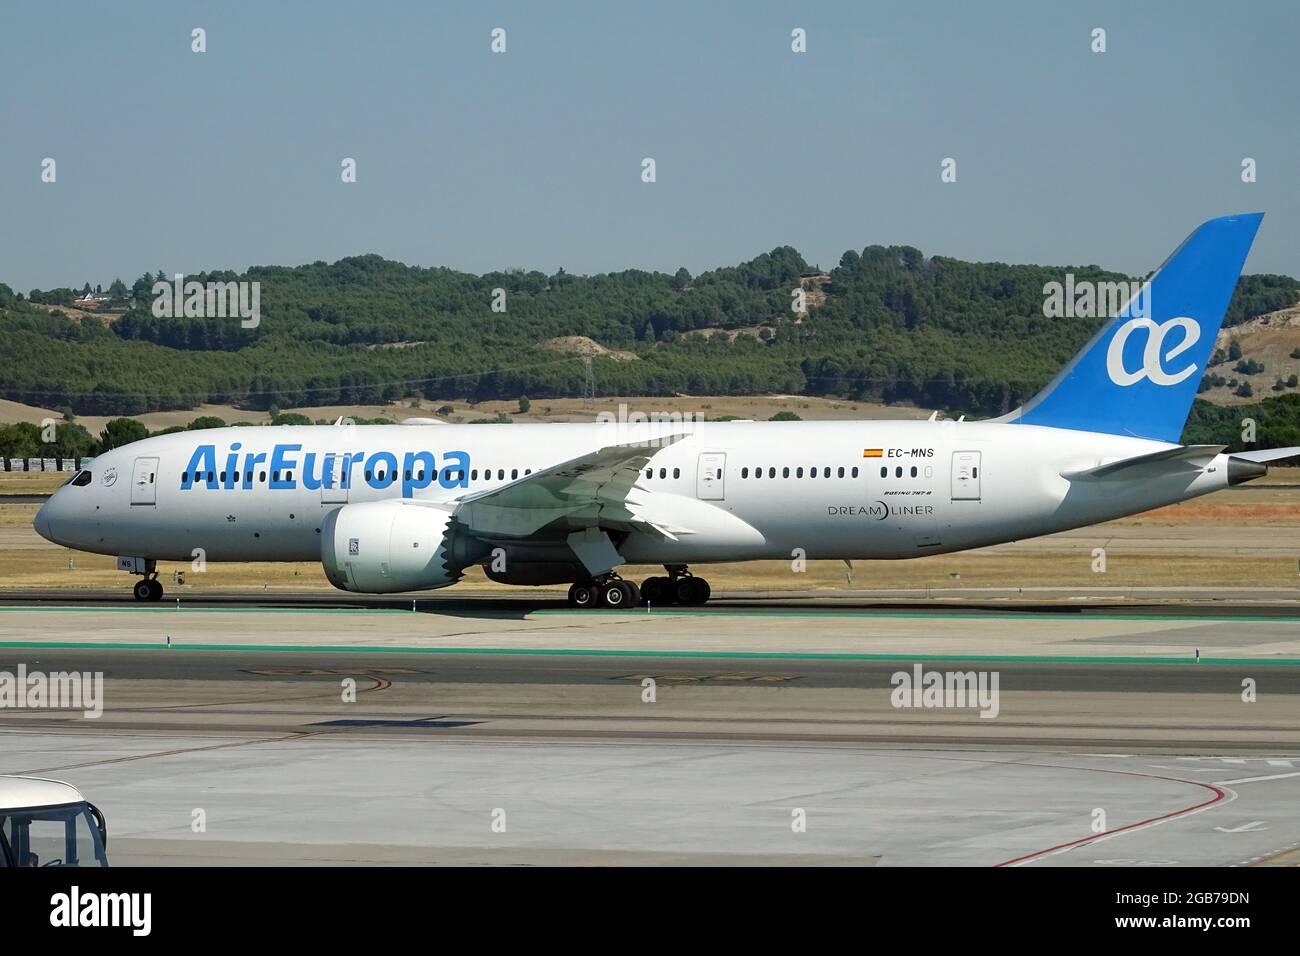 Air Europa Líneas Aéreas, S.A.U., branded as Air Europa (is the third-largest Spanish airline), Airbus A330-200 airplane Stock Photo